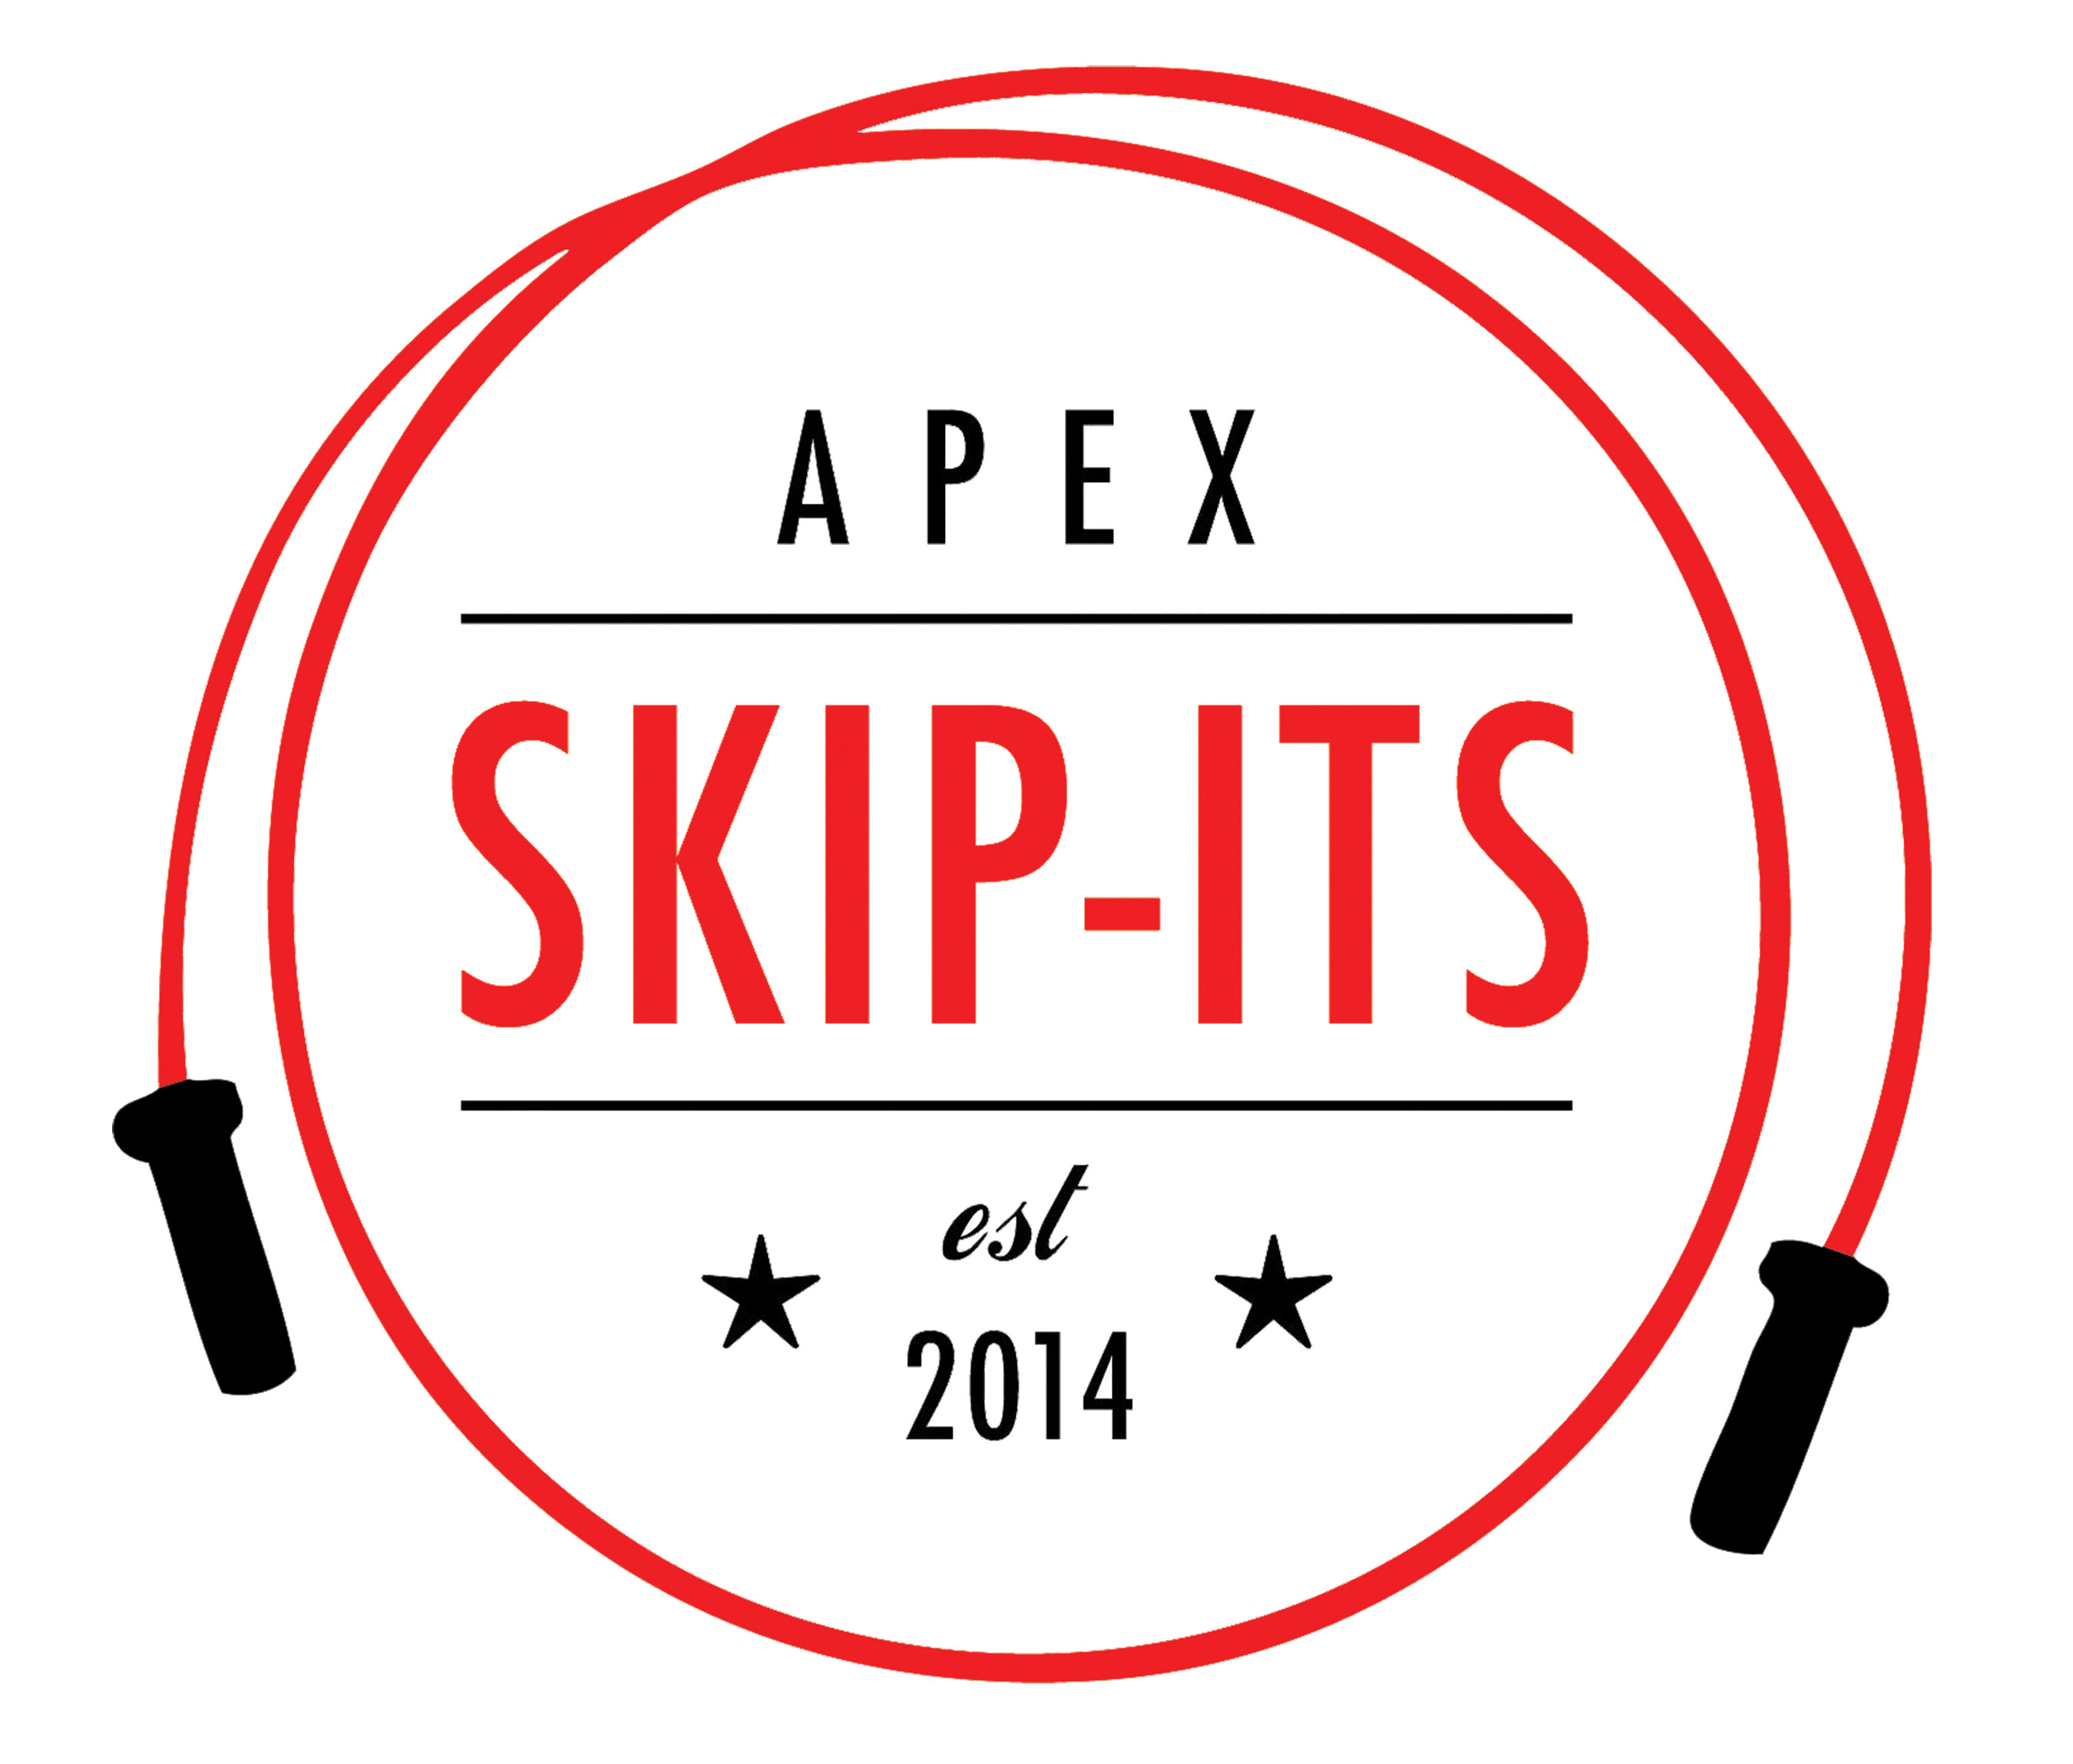 The Apex Skip-Its Team:  Using Jump Rope to Develop Character, Leadership, and Wisdom     By Amy Iori